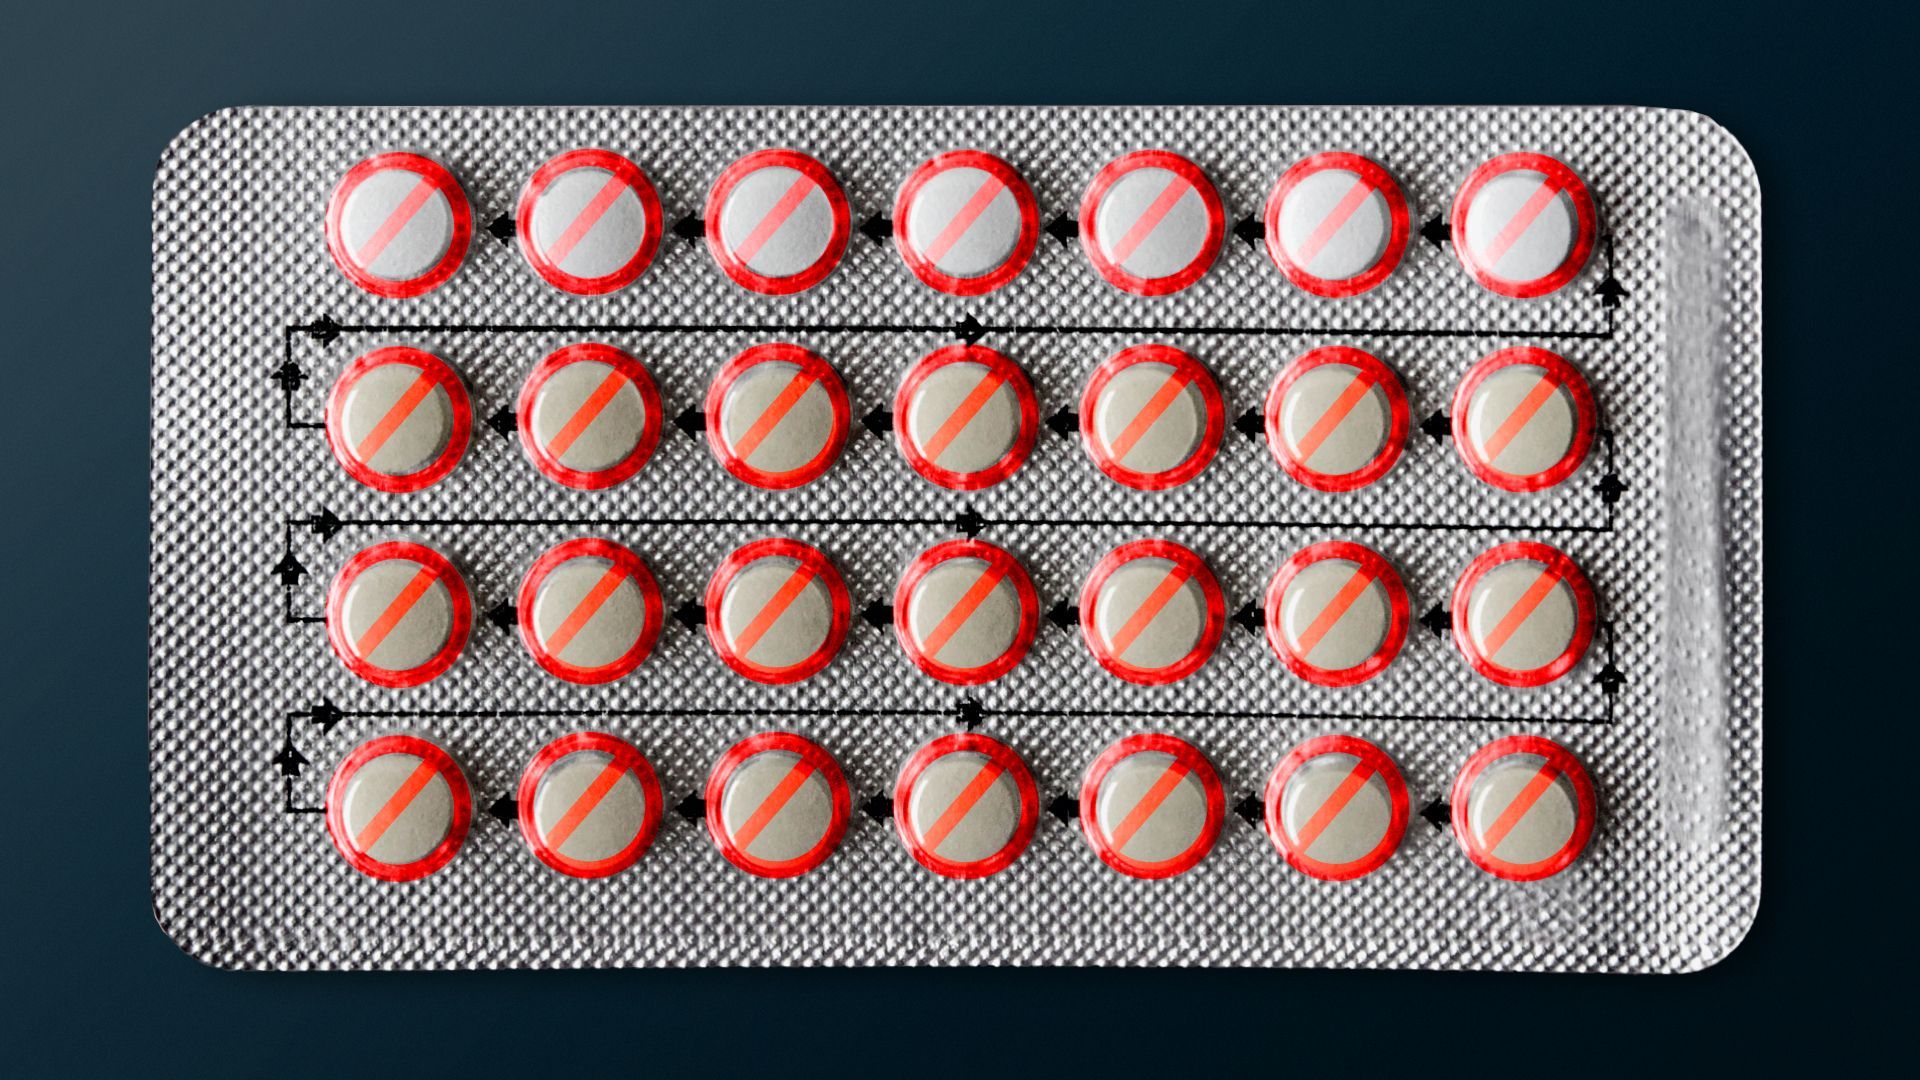 Illustration of a sheet of birth control pills with the "no" symbol crossing each pill out.